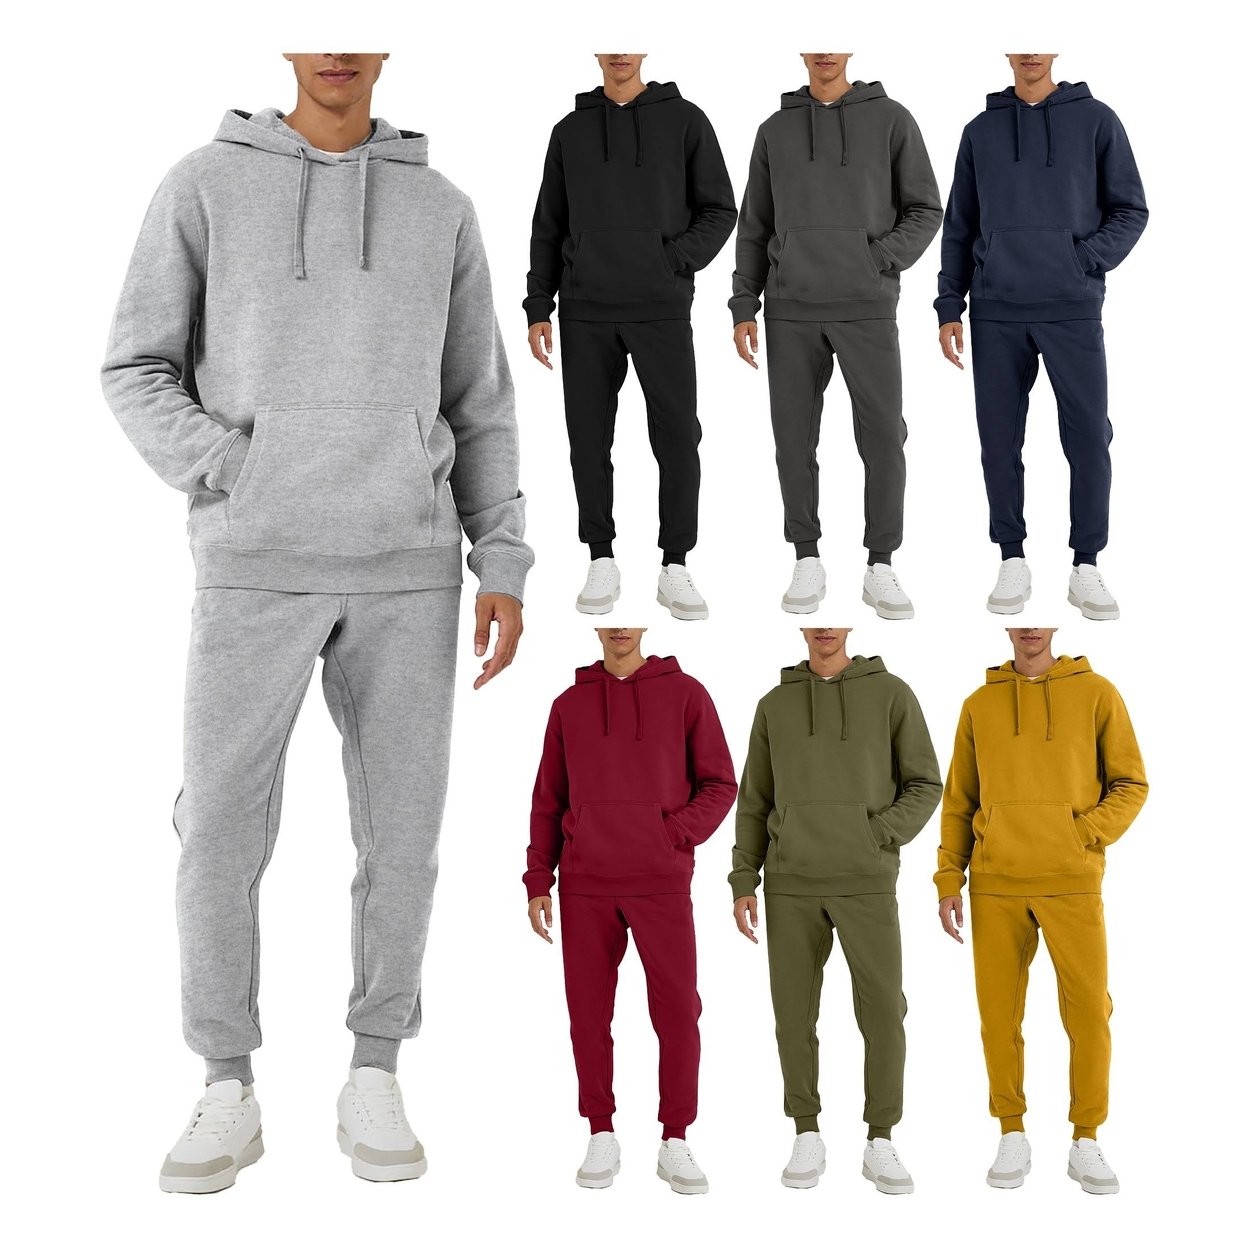 Multi-Pack: Men's Big & Tall Athletic Active Jogging Winter Warm Fleece Lined Pullover Tracksuit Set - Grey, 2-pack, Large